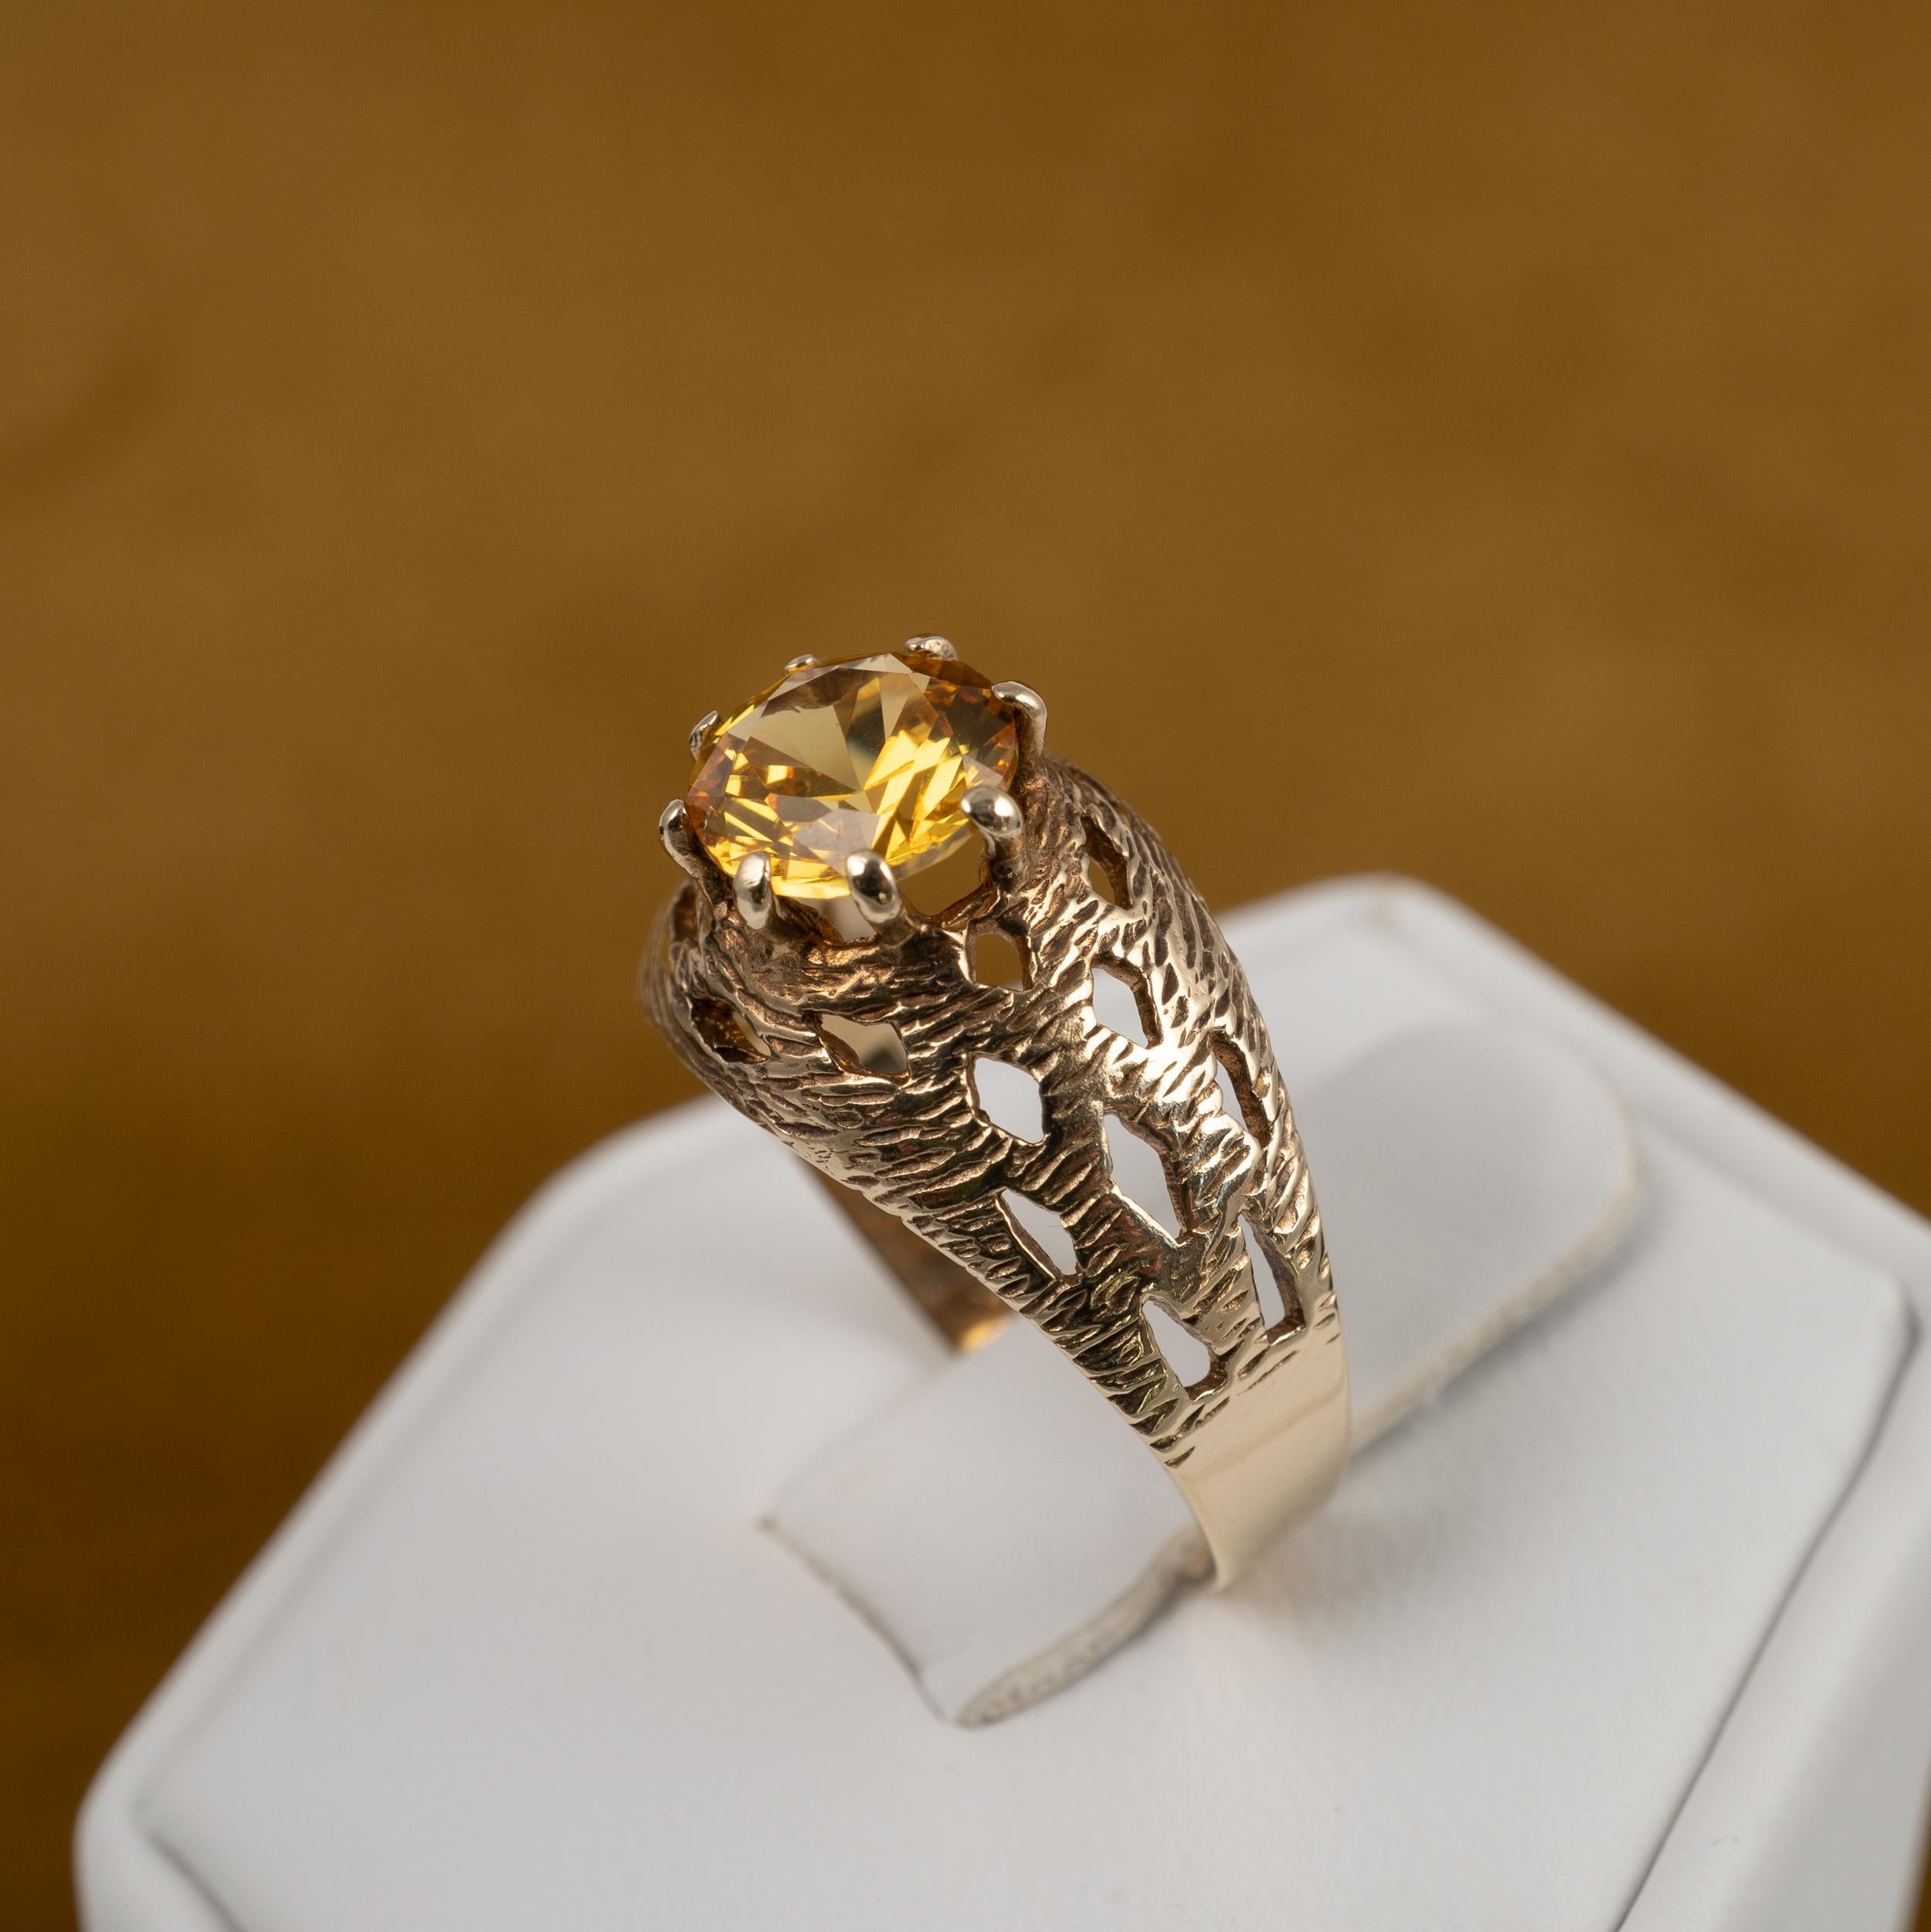 Vintage 19780s Chunky Citrine Solitaire Ring 9 Karat Gold Hallmark Dated 1974 For Sale 2